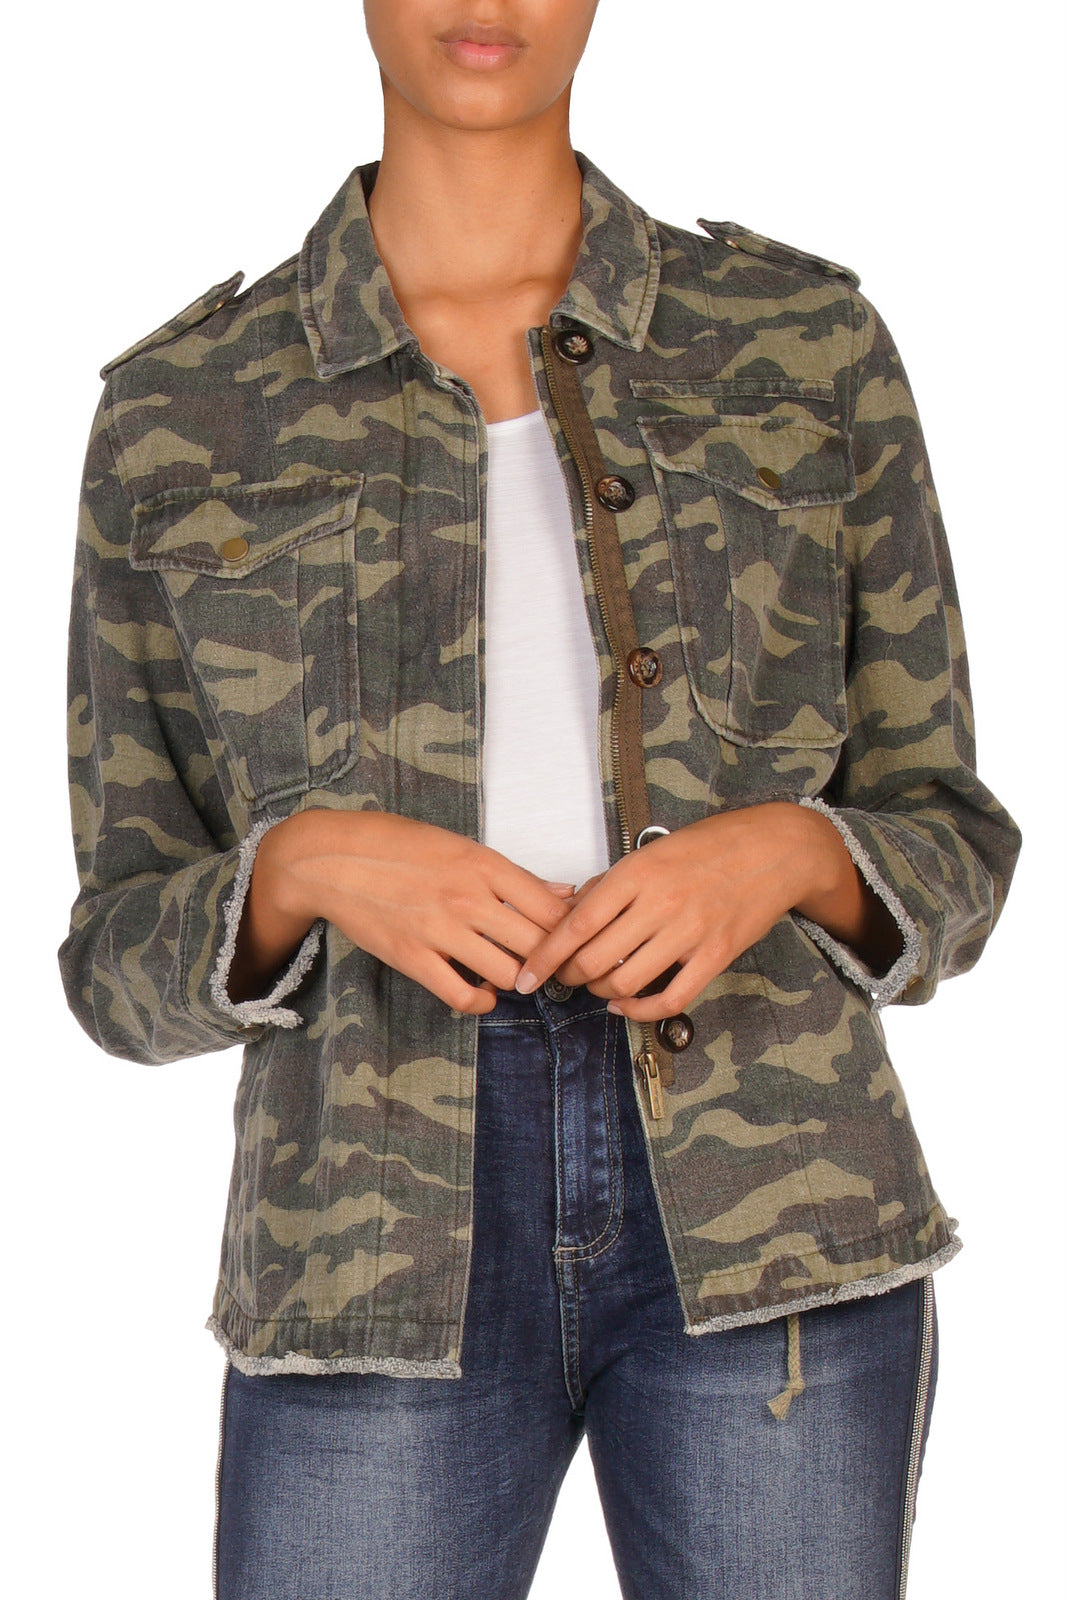 Olive Green Camouflage Distressed Jacket at Maria Vincent Boutique